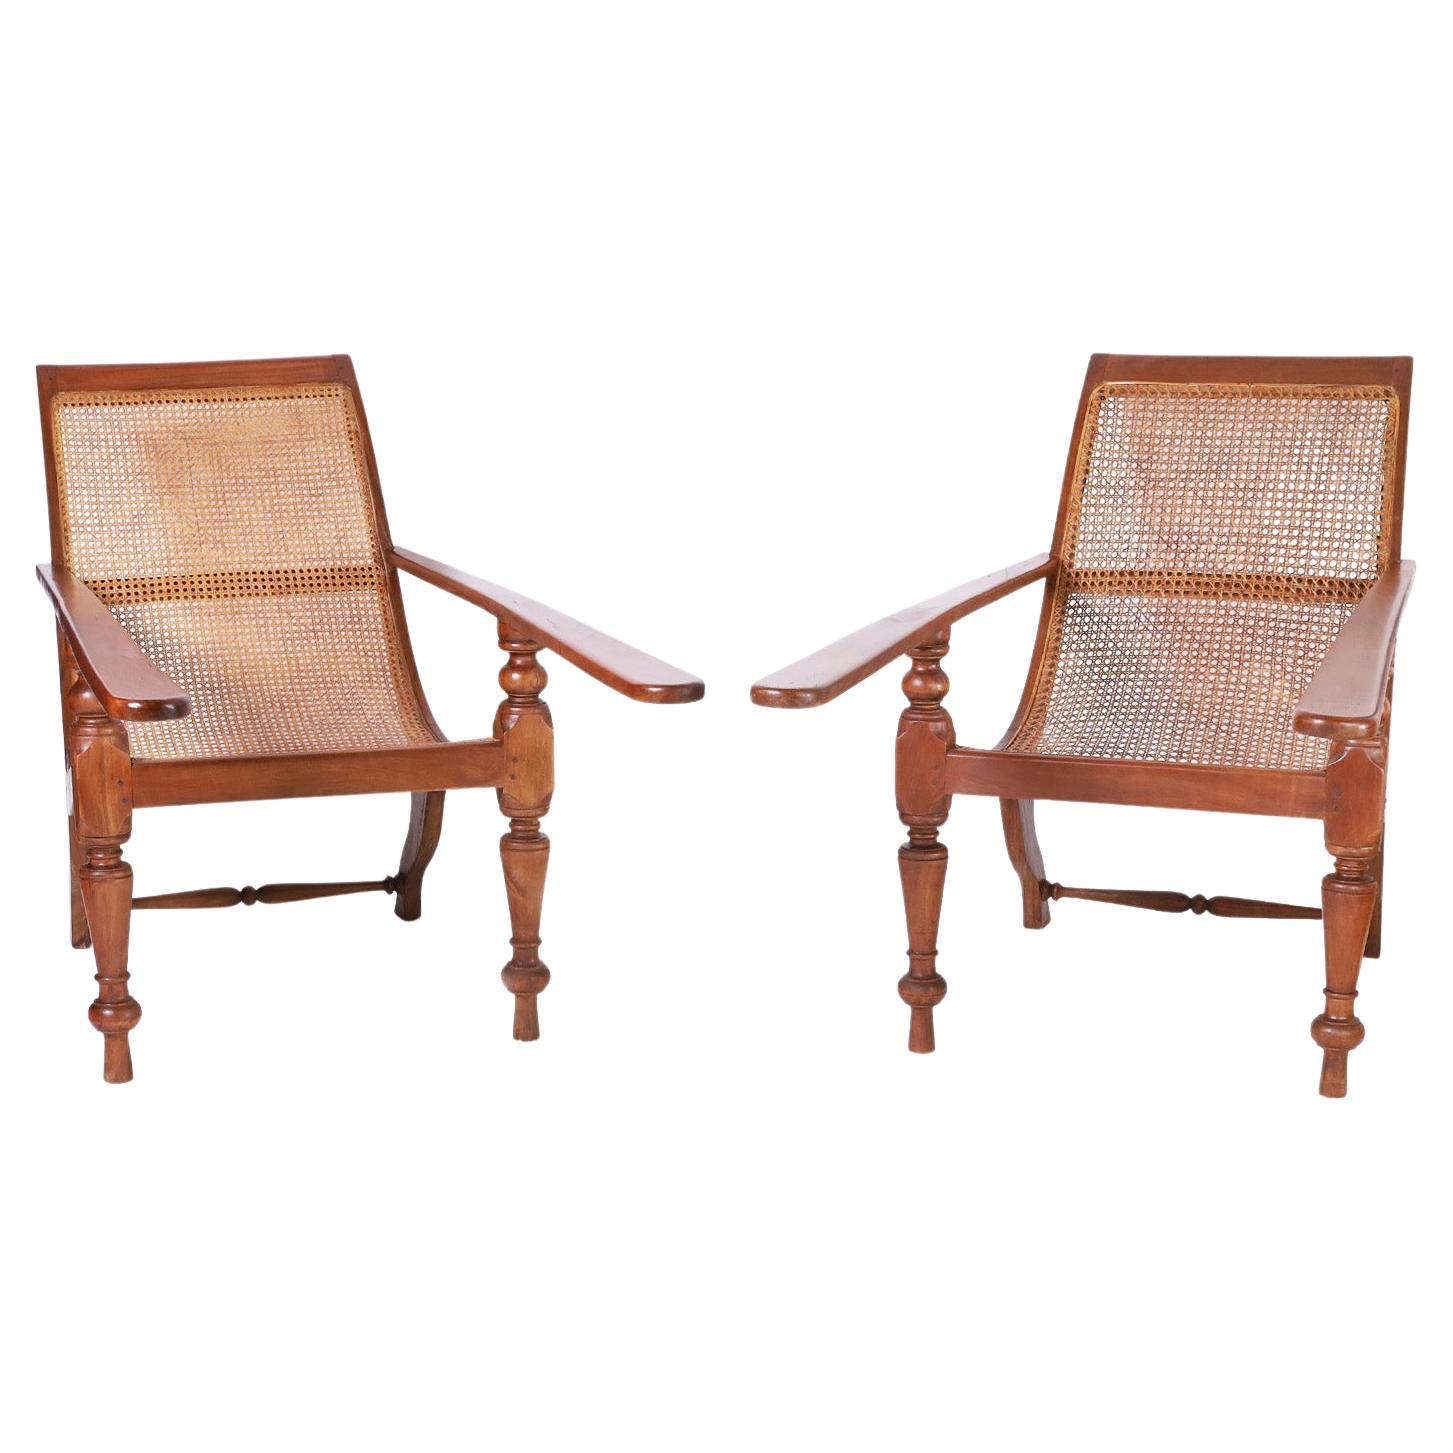 Pair of Antique Caned British Colonial Planters Chairs For Sale